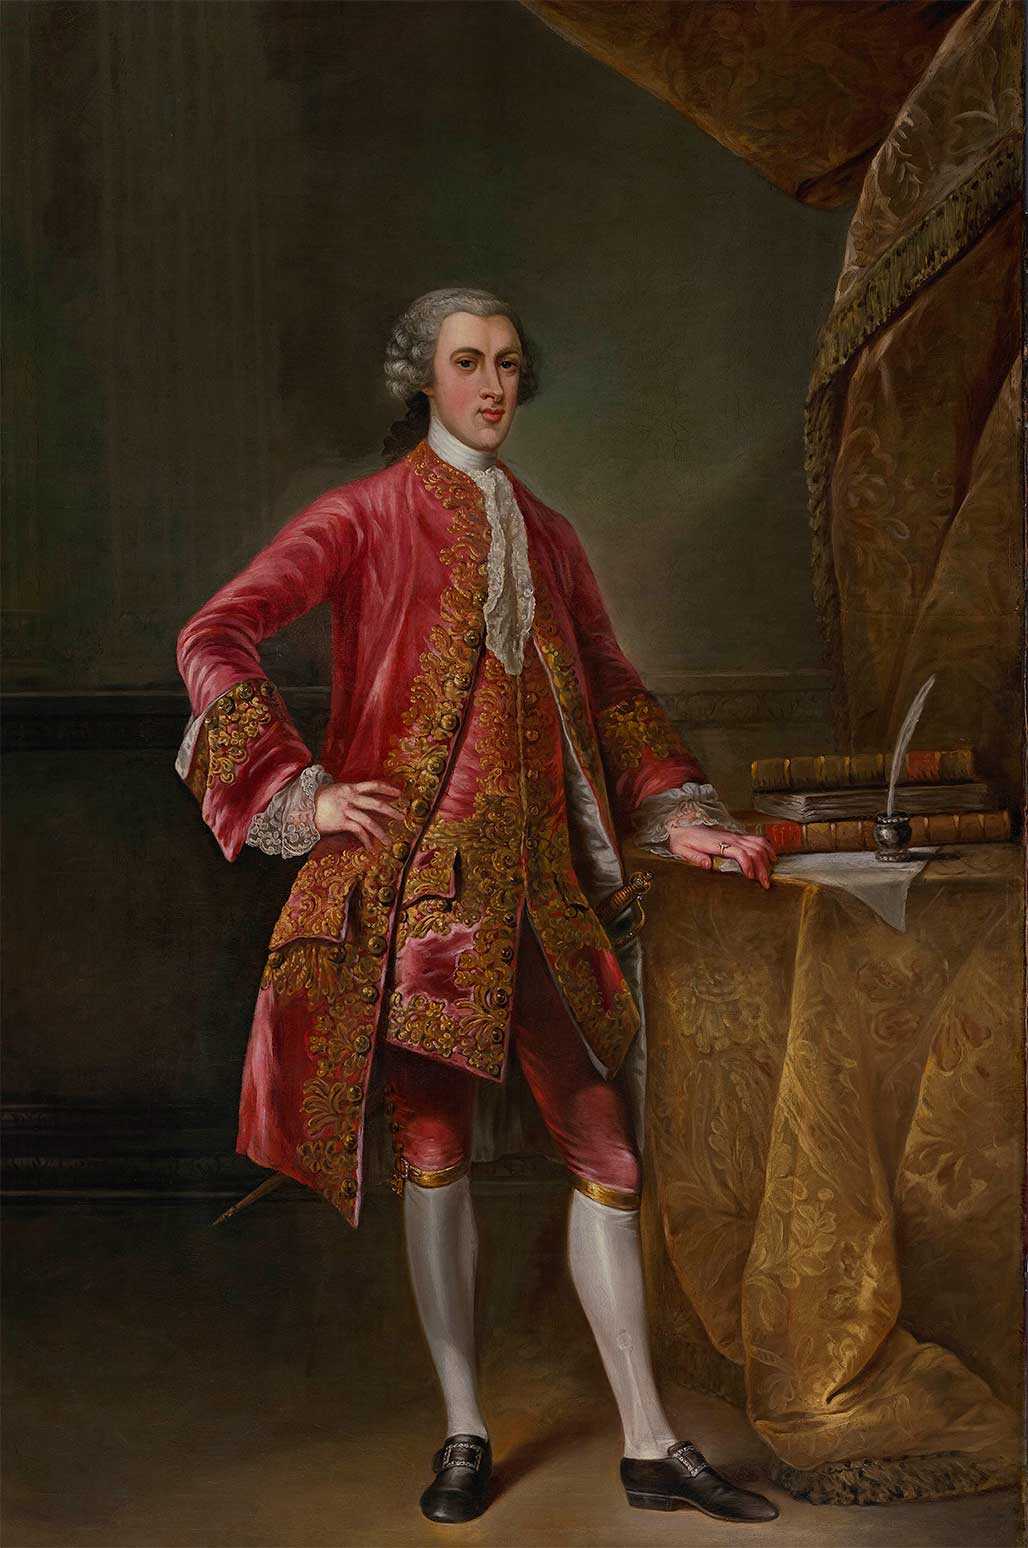 Frederick Cavert, 6th Lord Baltimore